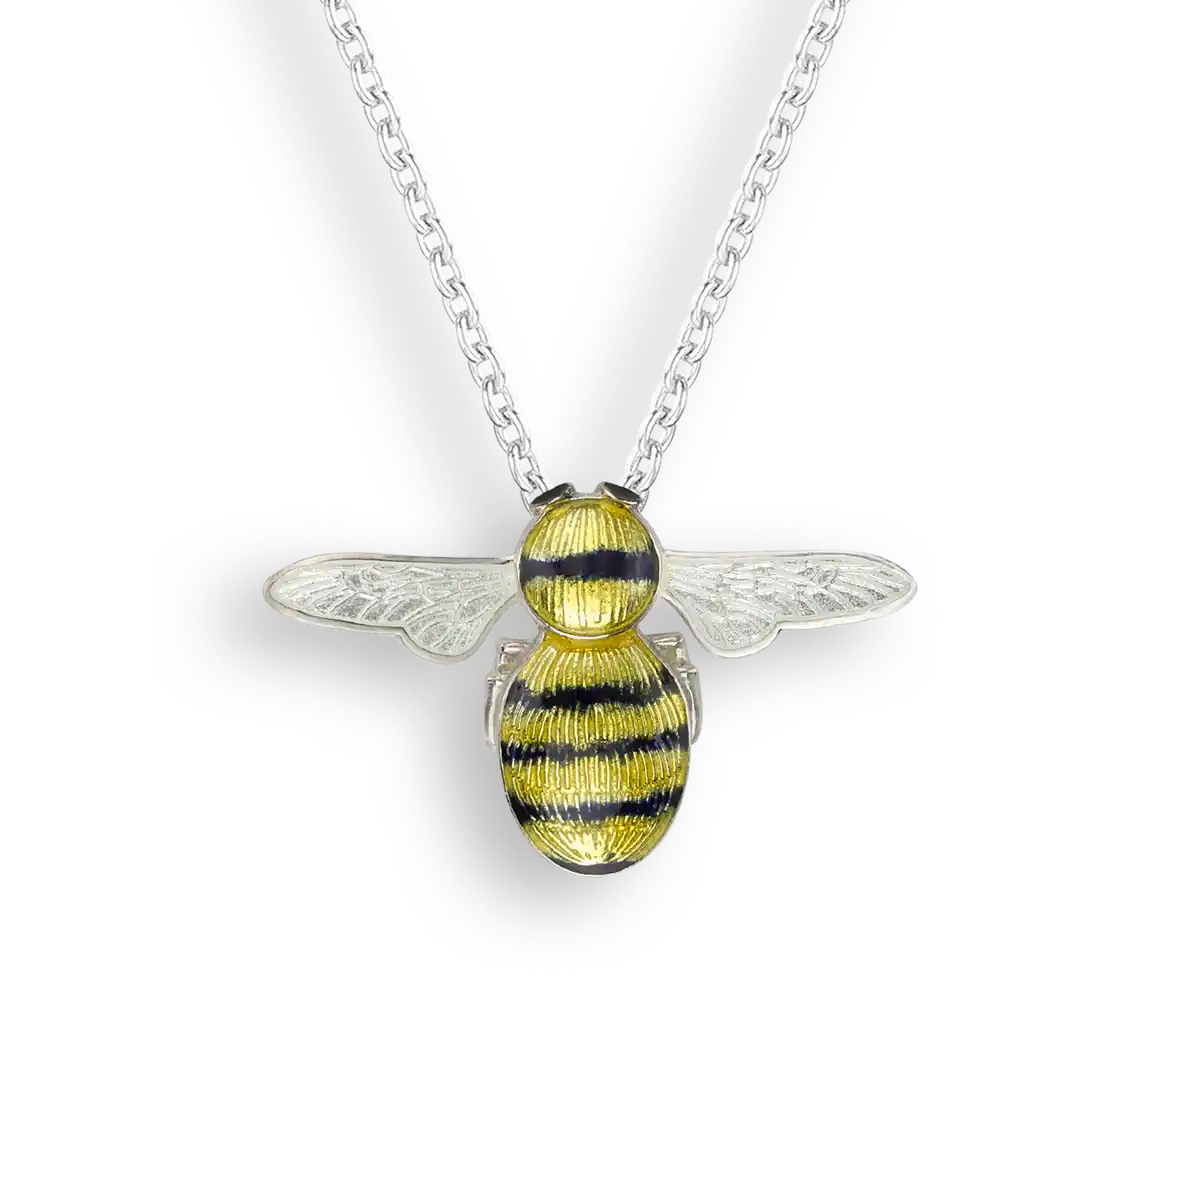 Yellow Bee Necklace. Sterling Silver